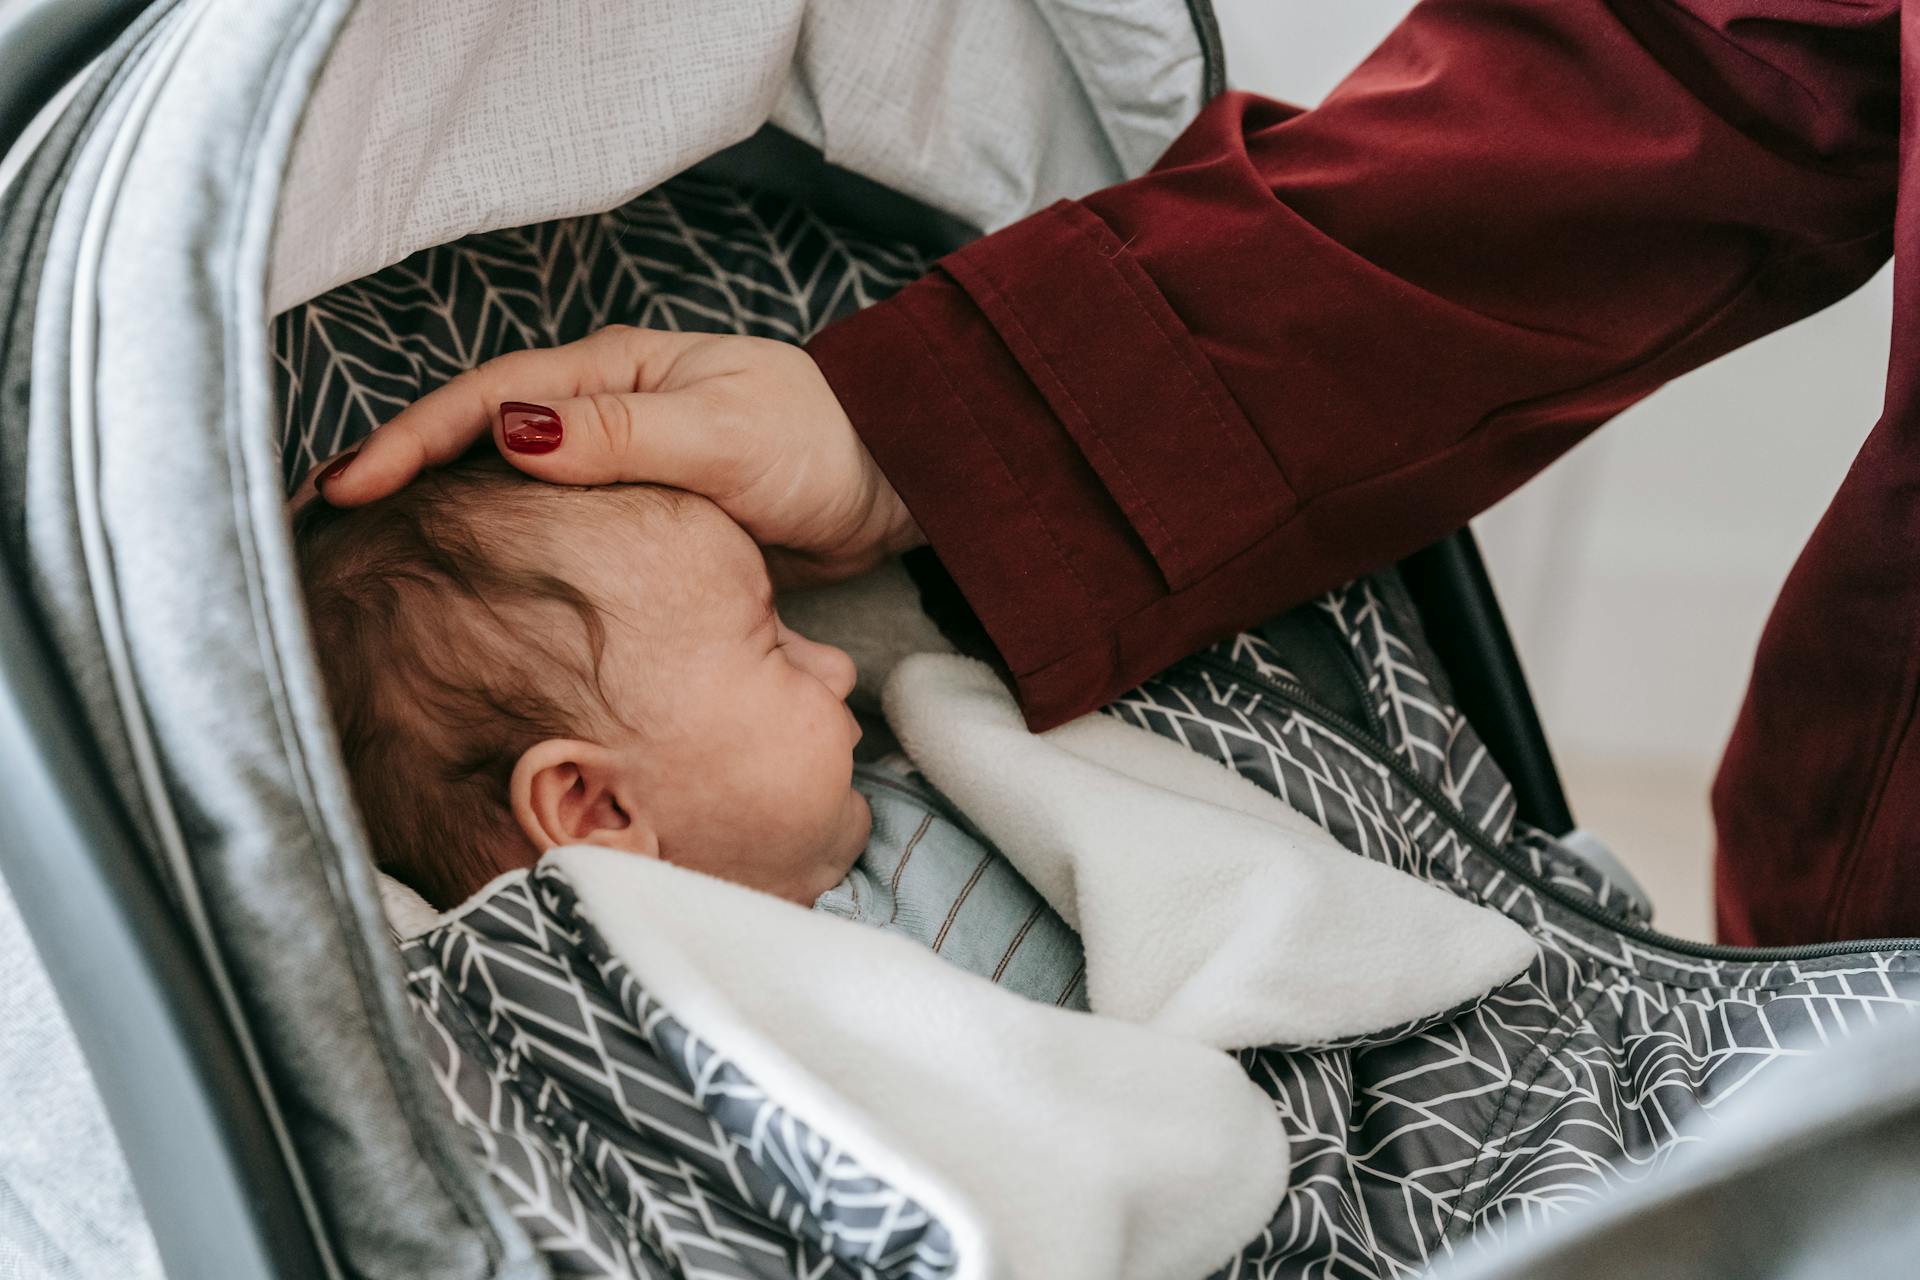 A mother admiring her baby sleeping in the stroller | Source: Pexels